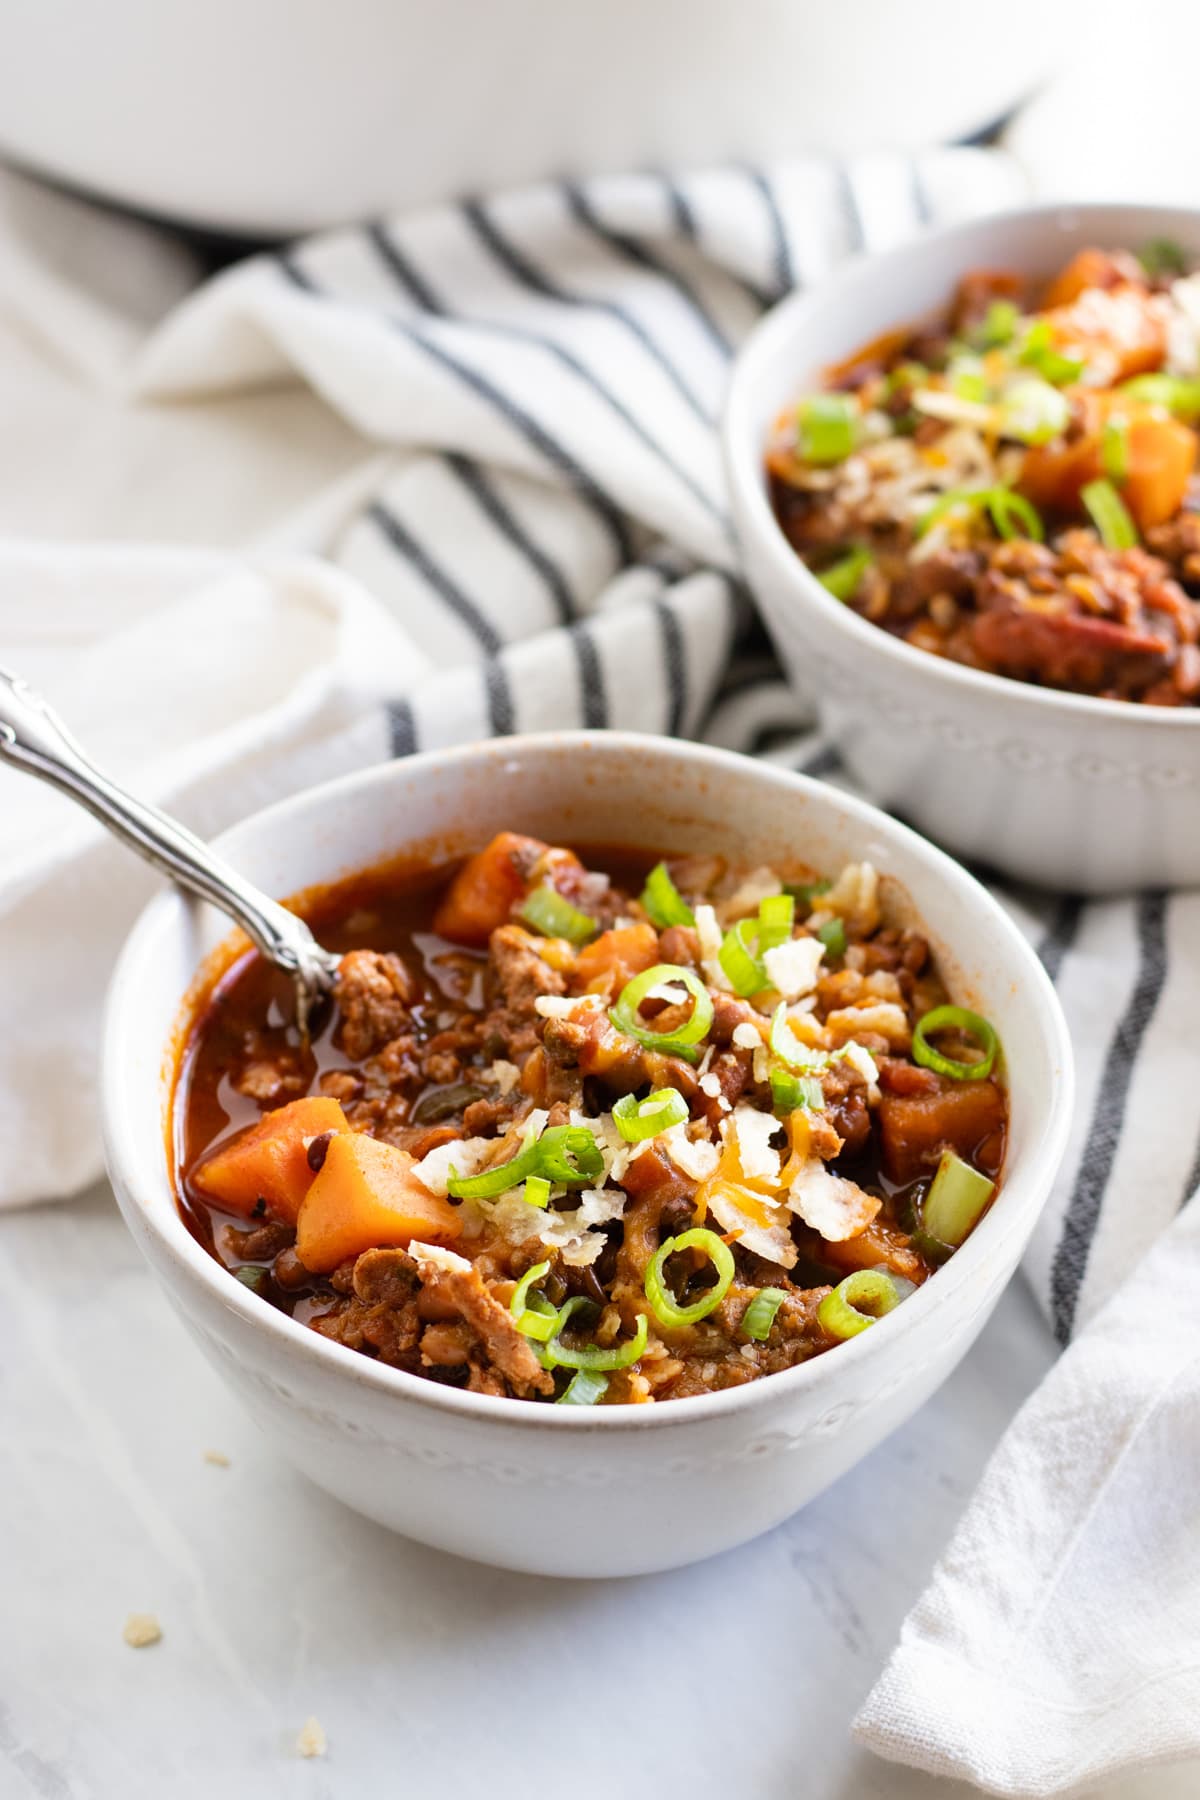 Two bowls of low FODMAP chili made with turkey, sweet potatoes, and lentils.